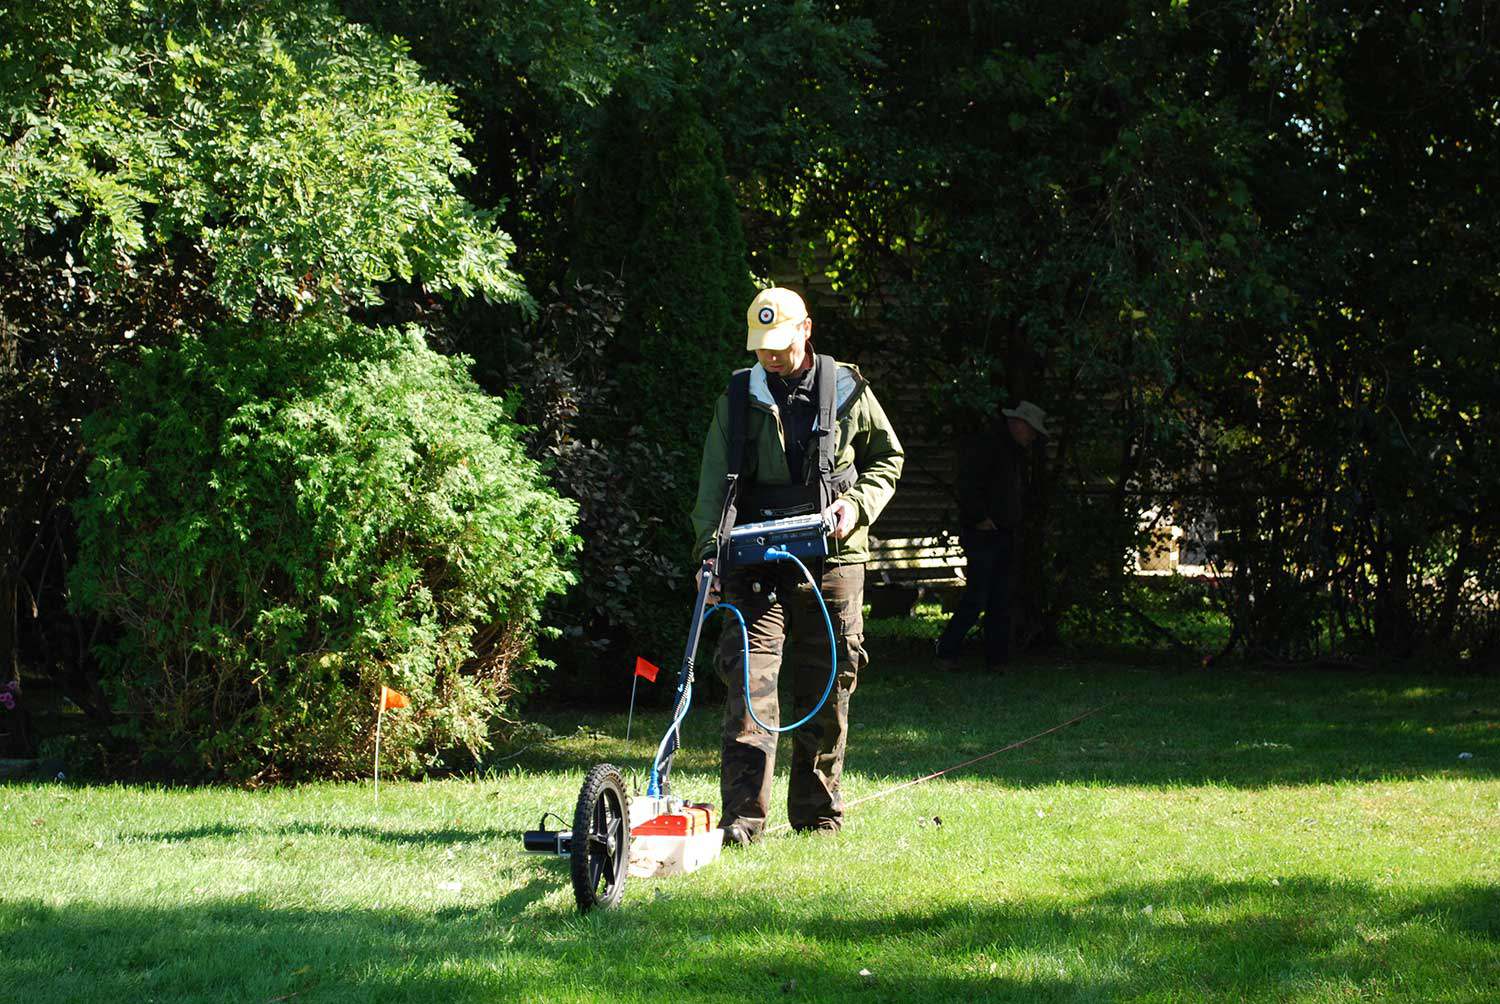 Using ground penetrating radar at the Henson Family Cemetery in 2011.